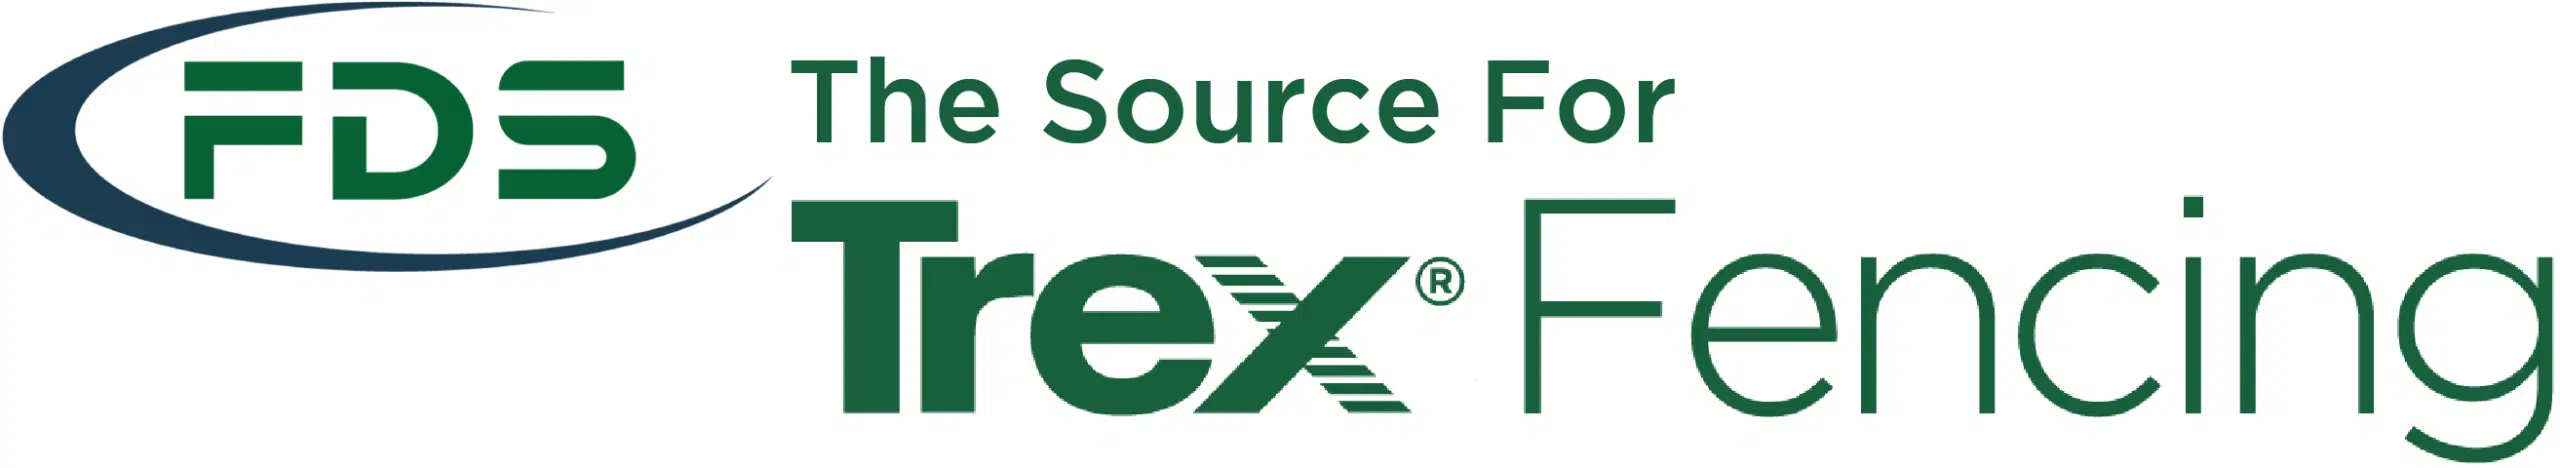 FDS, the Source for Trex Fencing logo